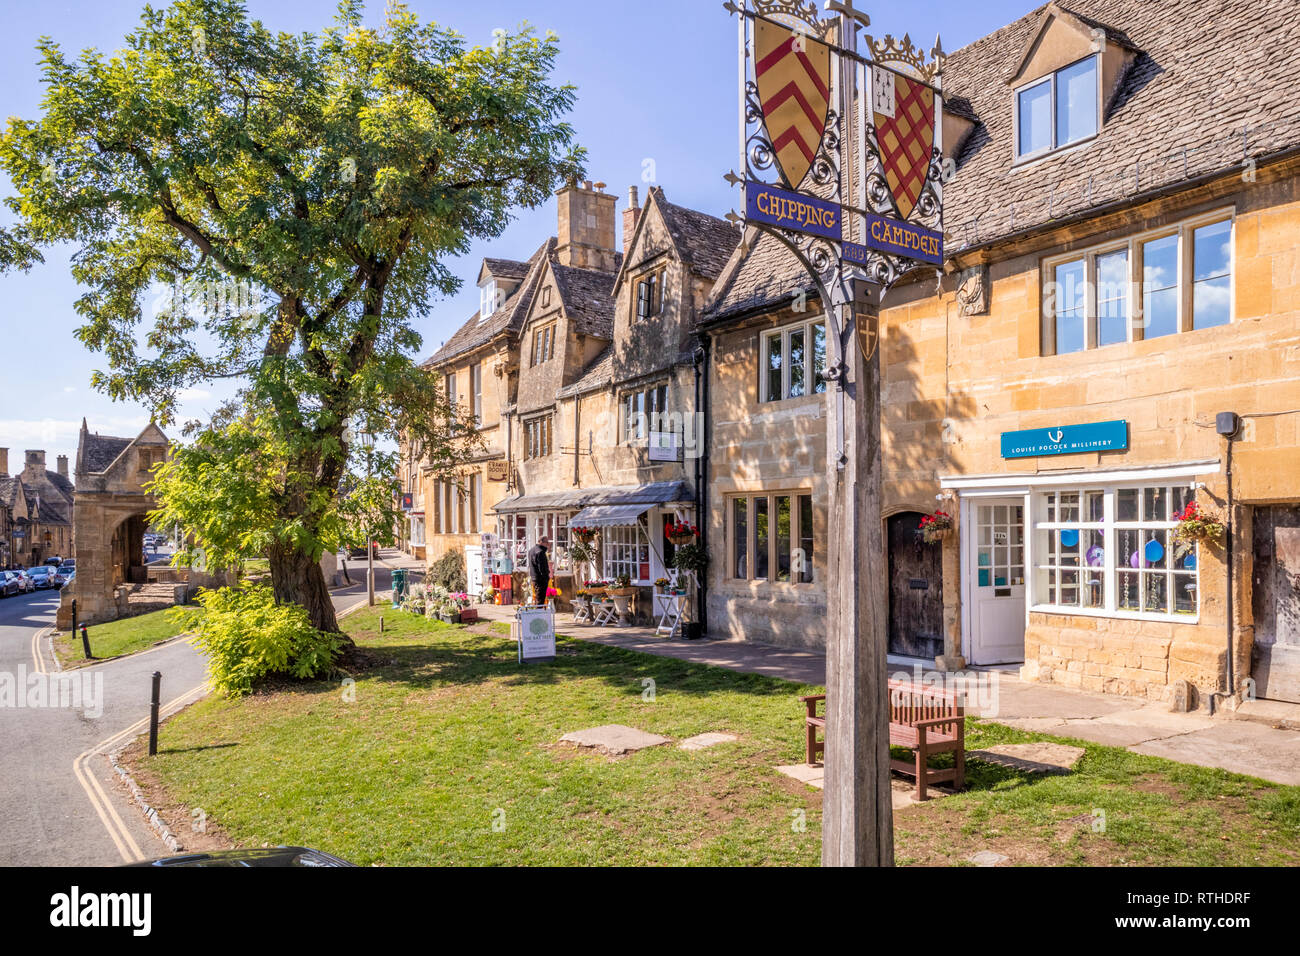 Old houses and shops in the High Street in the Cotswold town of Chipping Campden, Gloucestershire, UK Stock Photo